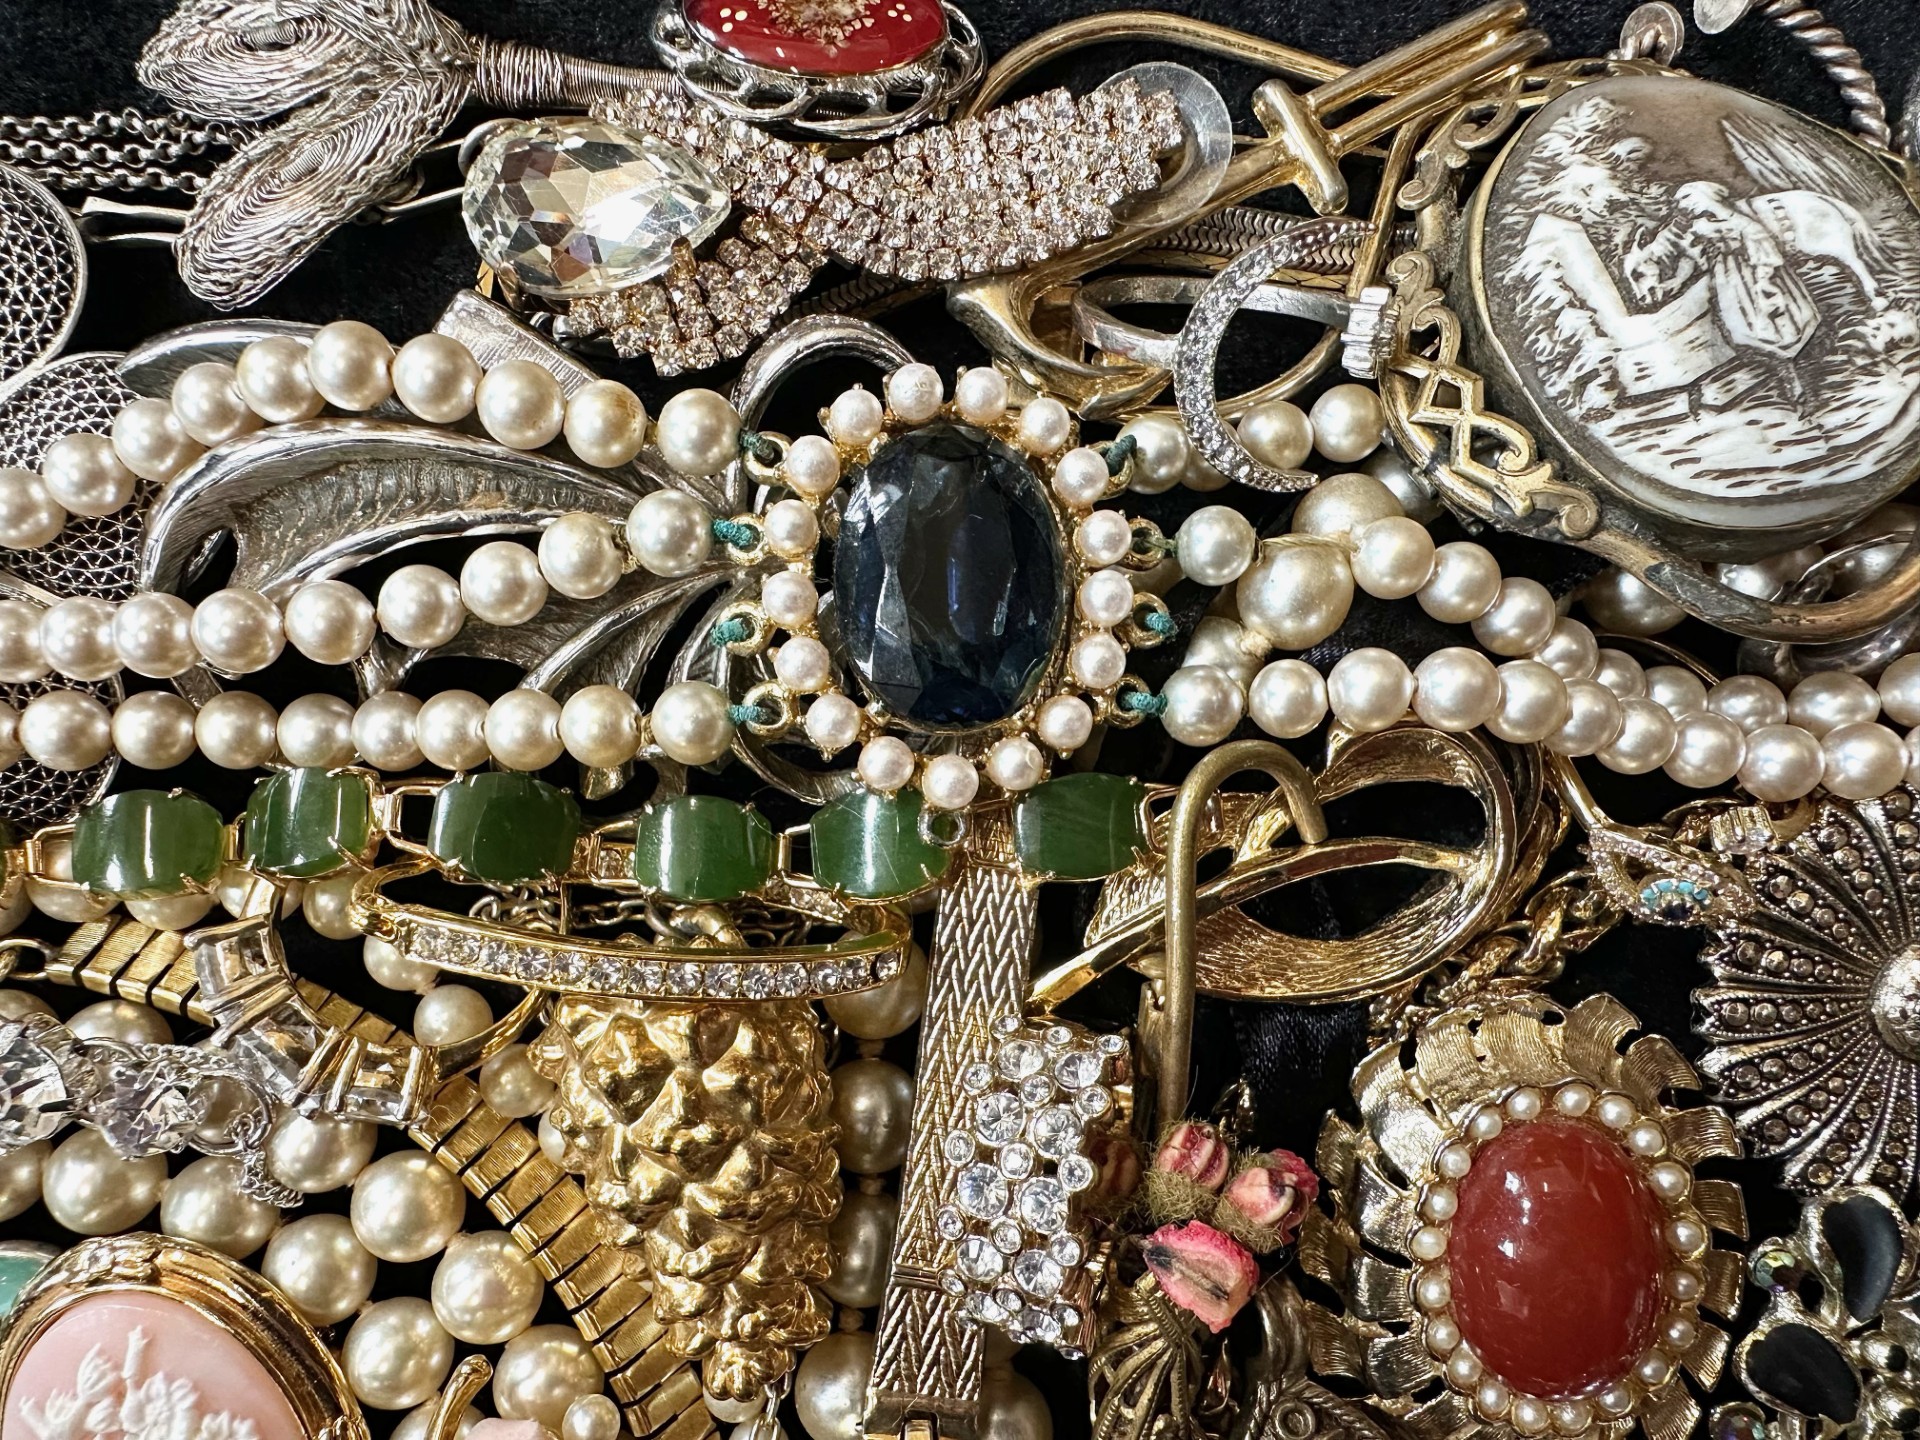 Collection of Quality Costume Jewellery, including pearls, necklaces, chains, bracelets, pendants, - Image 4 of 4